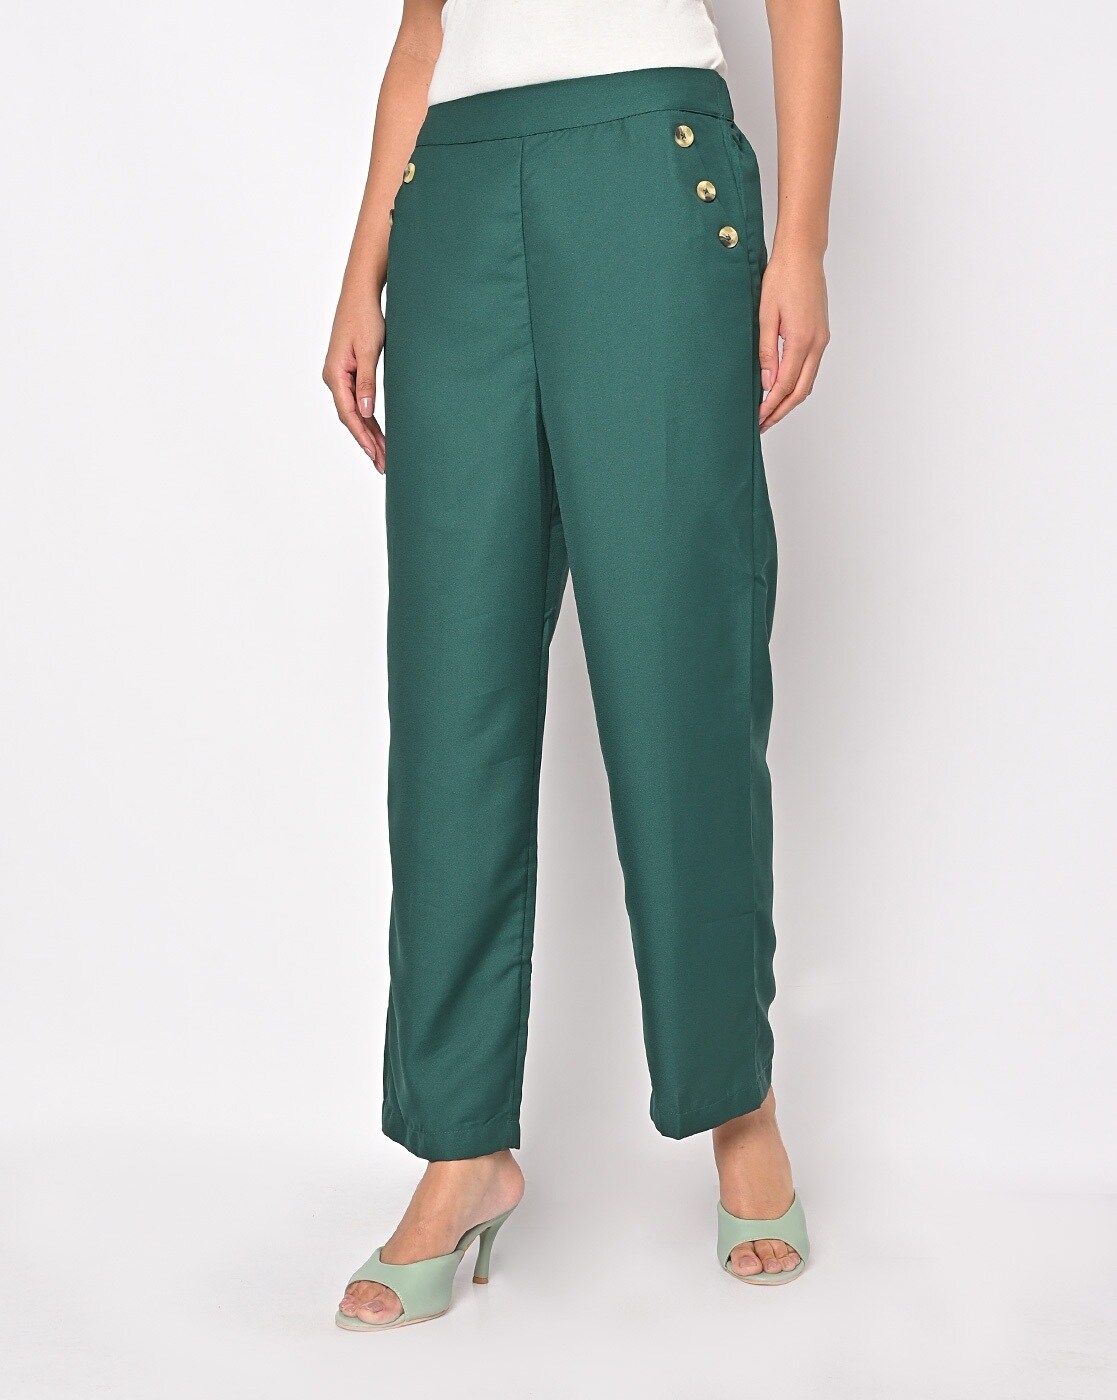 350 Best Green pants outfit ideas | green pants outfit, green pants, outfits